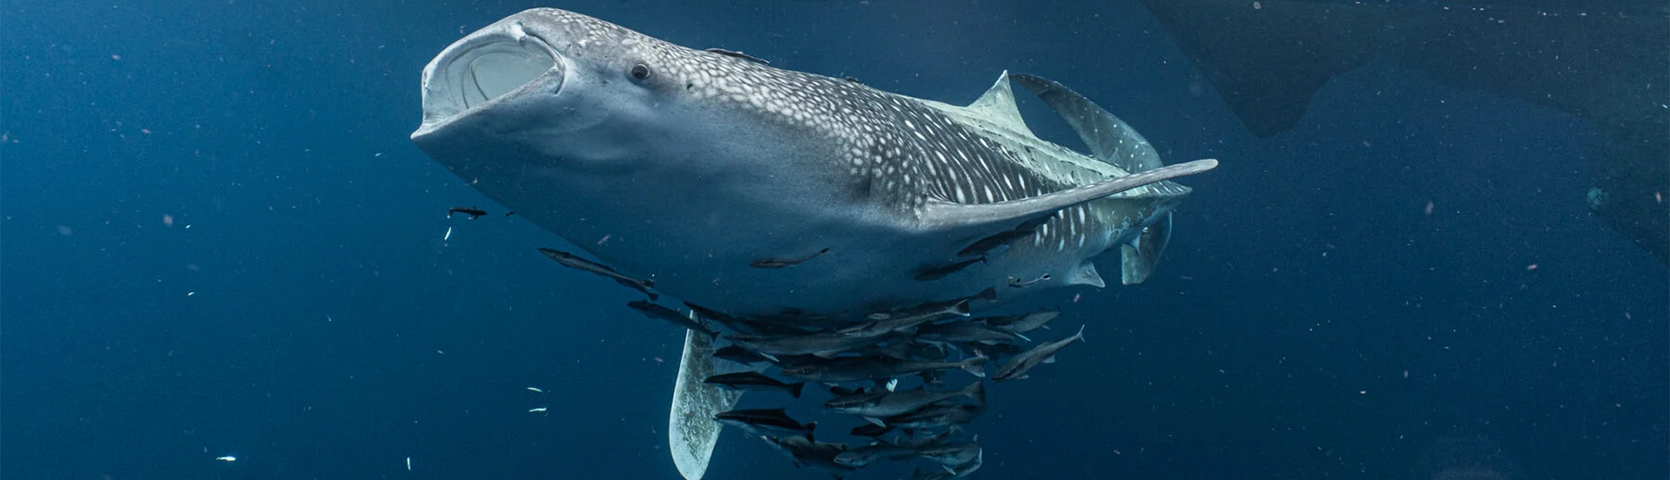 Whale sharks thriving in waters off Australia